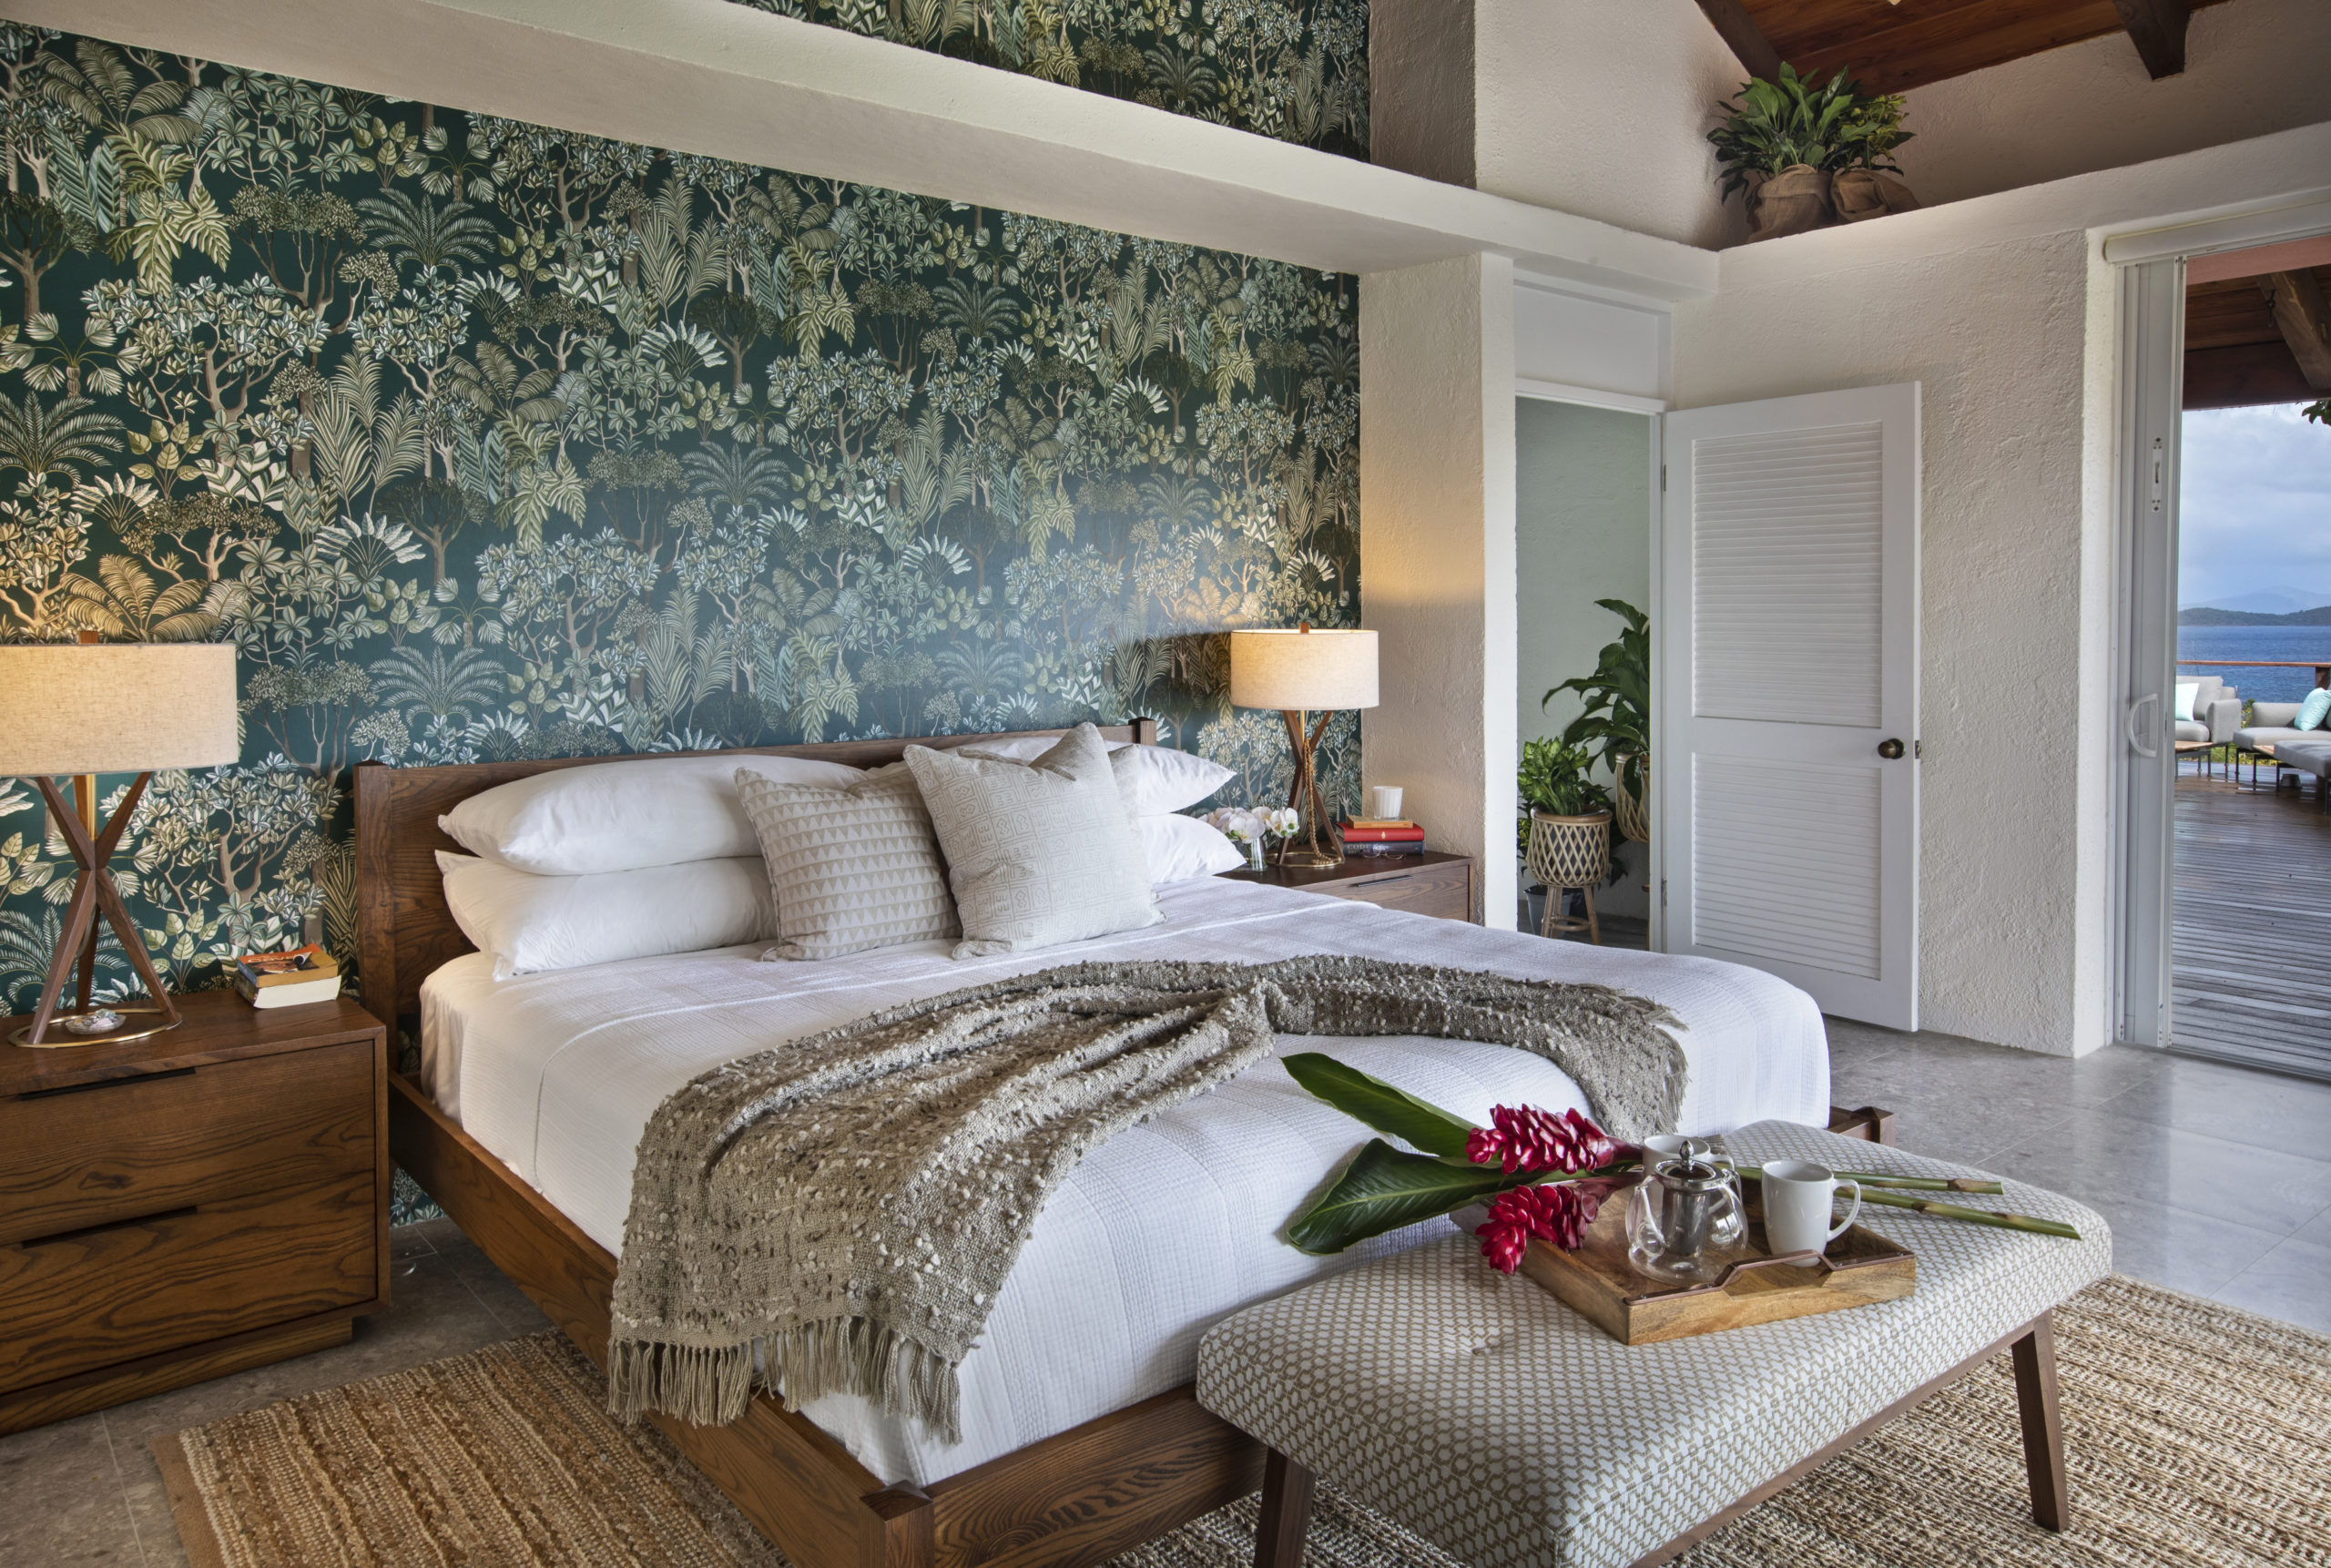 This master bedroom has a tropical wal paper accent wall that provides a pop of color to the fresh and cleanliness of the room.